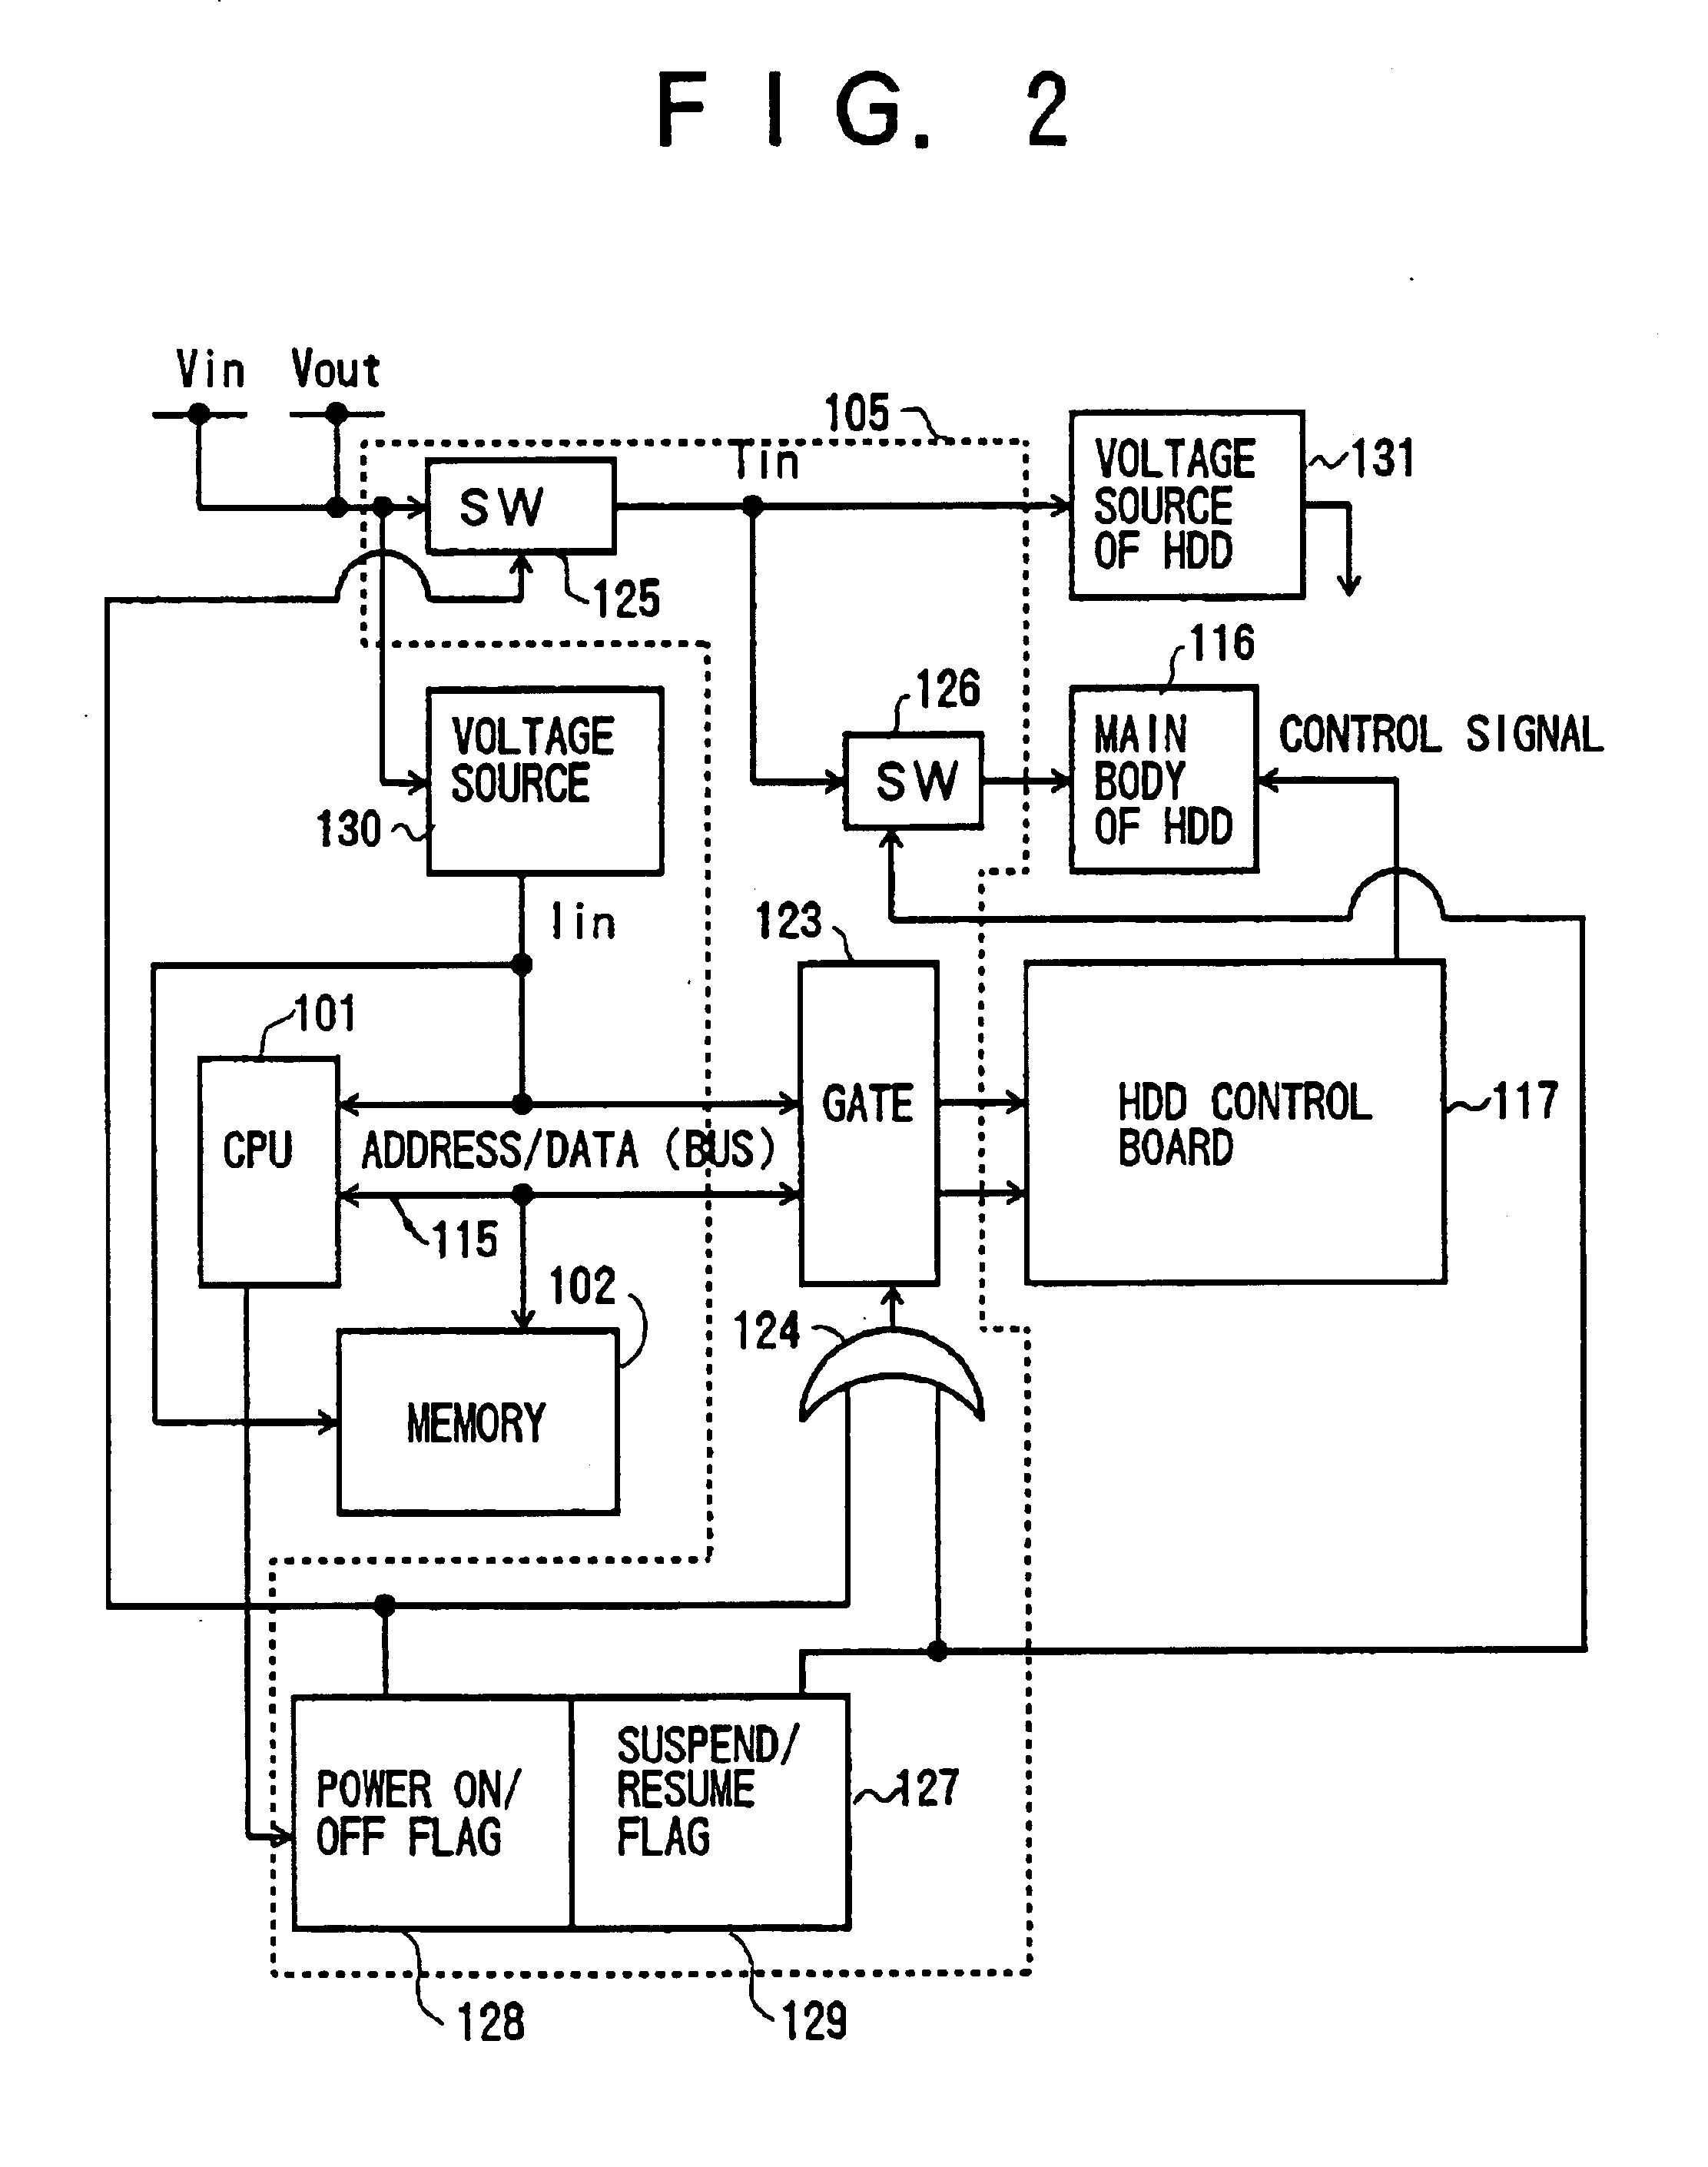 Information processing apparatus, power control method and recording medium to control a plurality of driving units according to the type of data to be processed